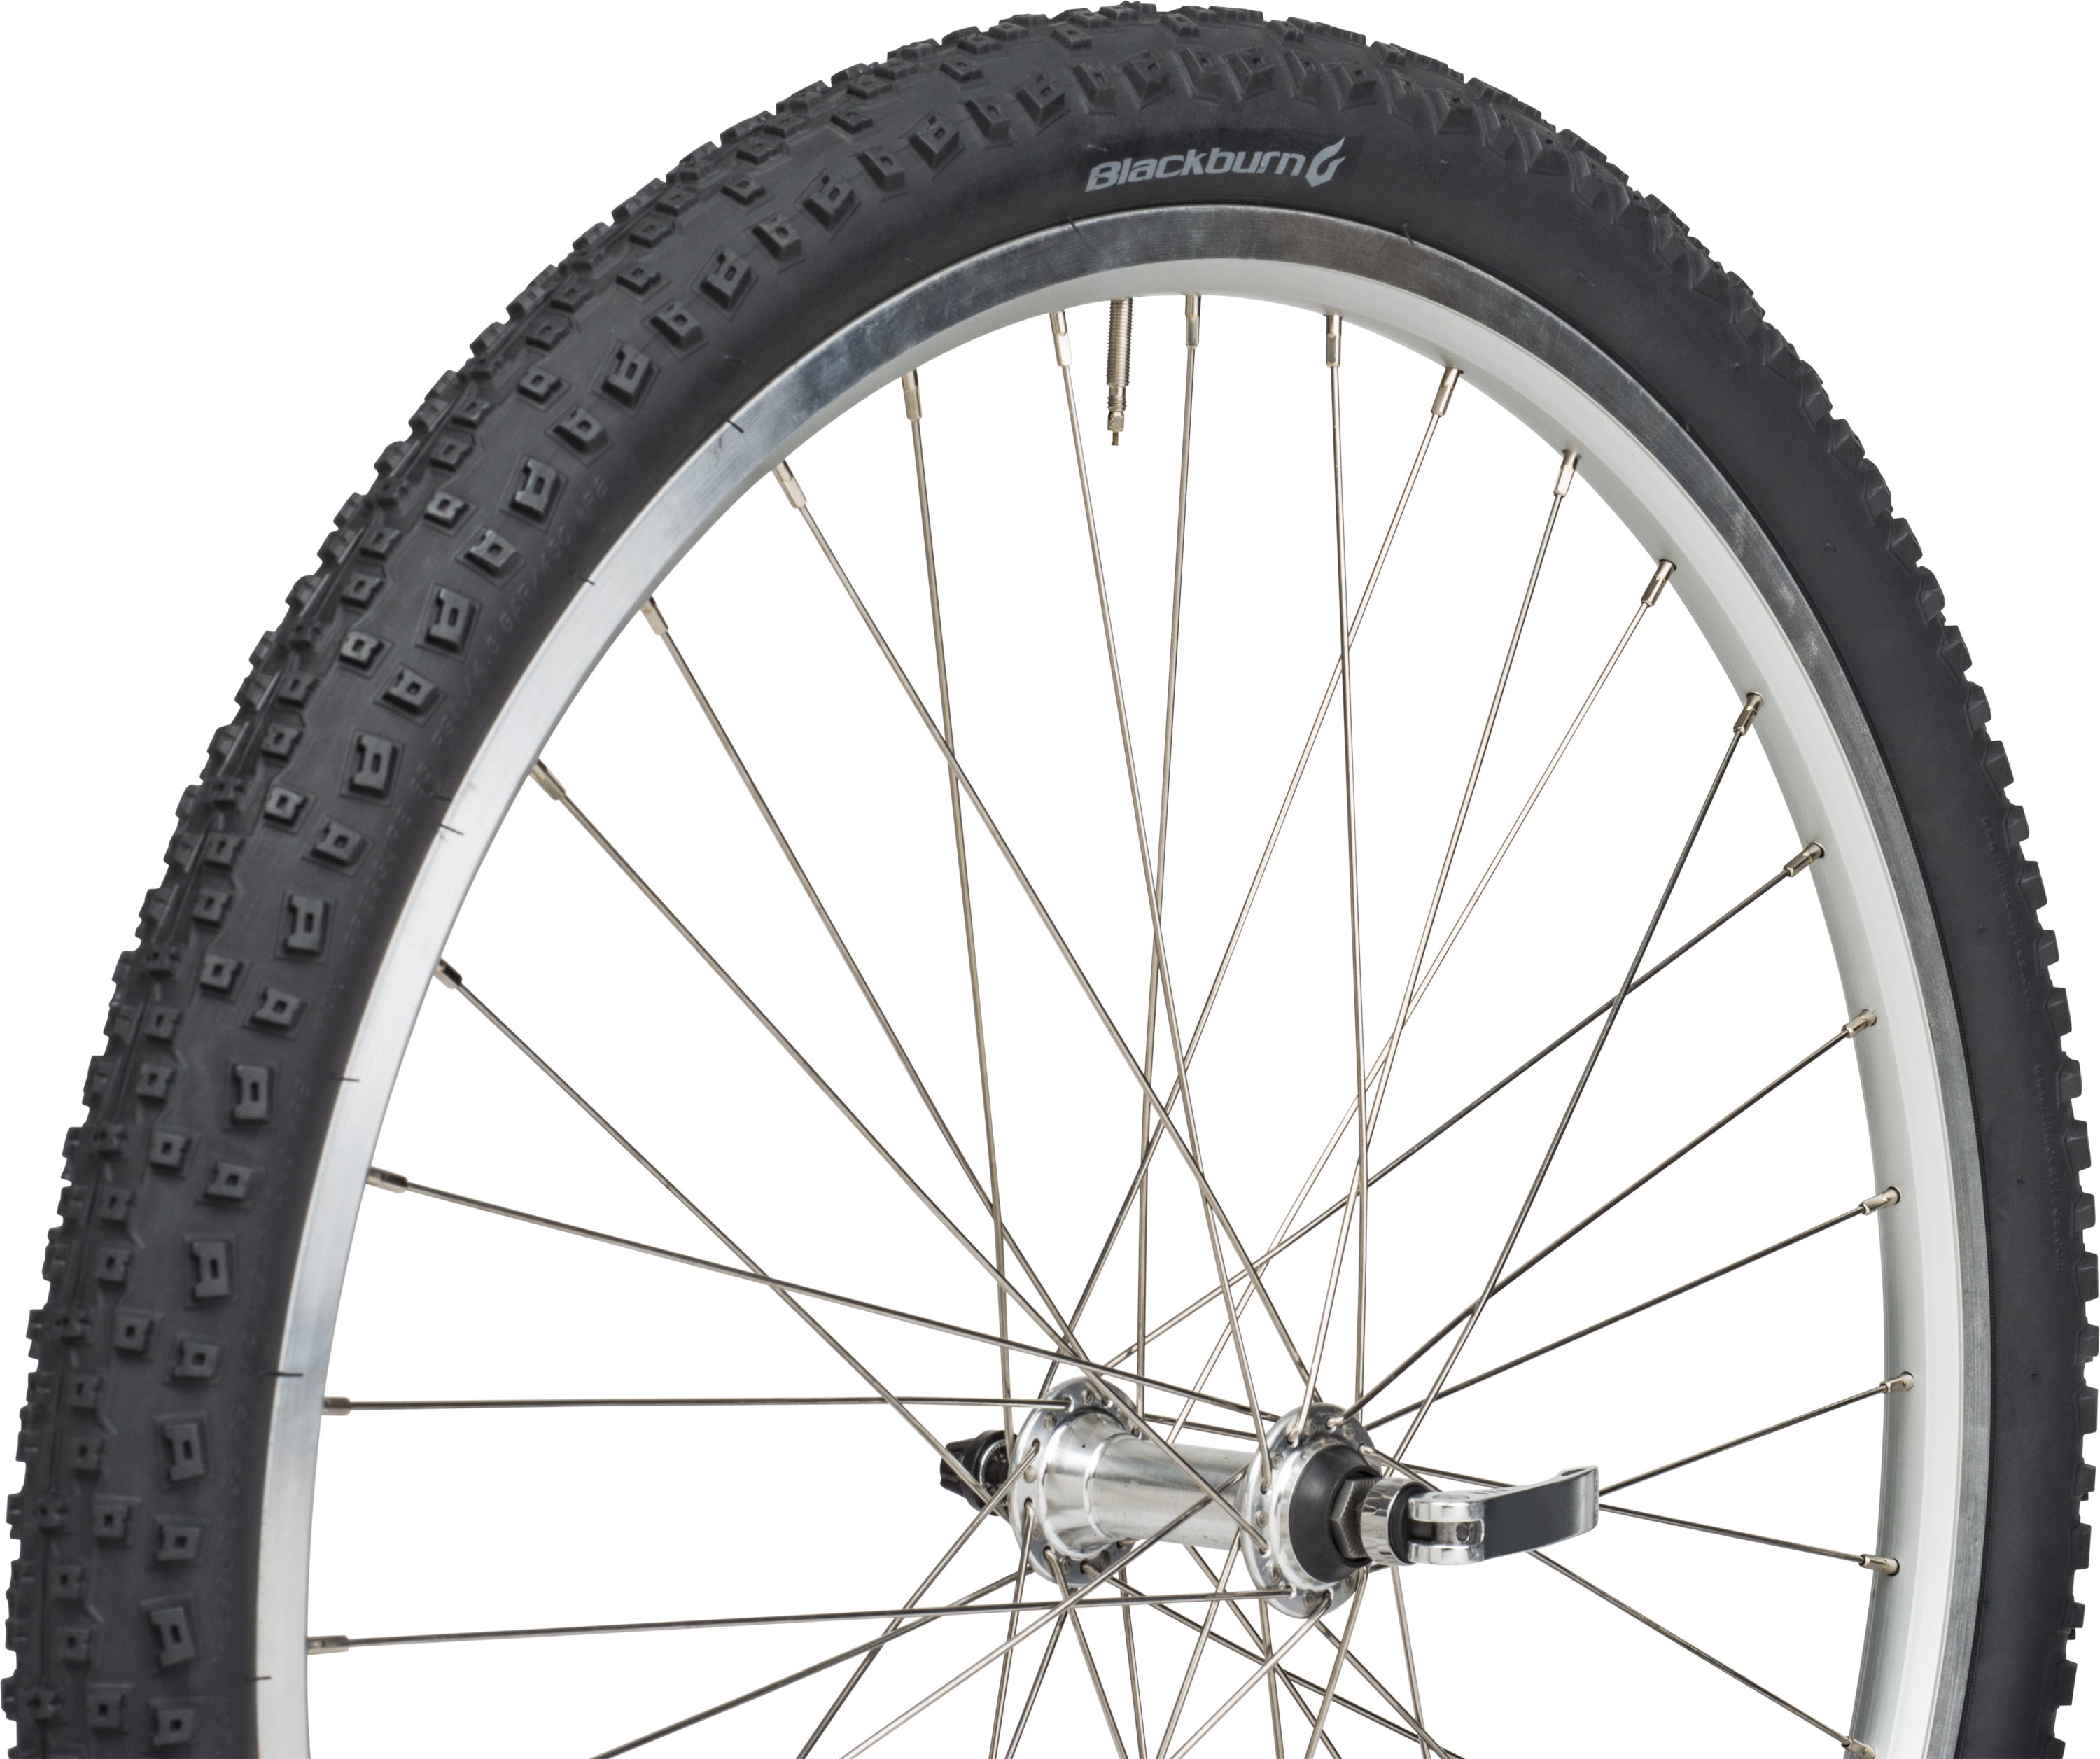 Replaces Sizes 1.75” 2.125” Bell 18" x 2.125" Mountain Bike Tire 